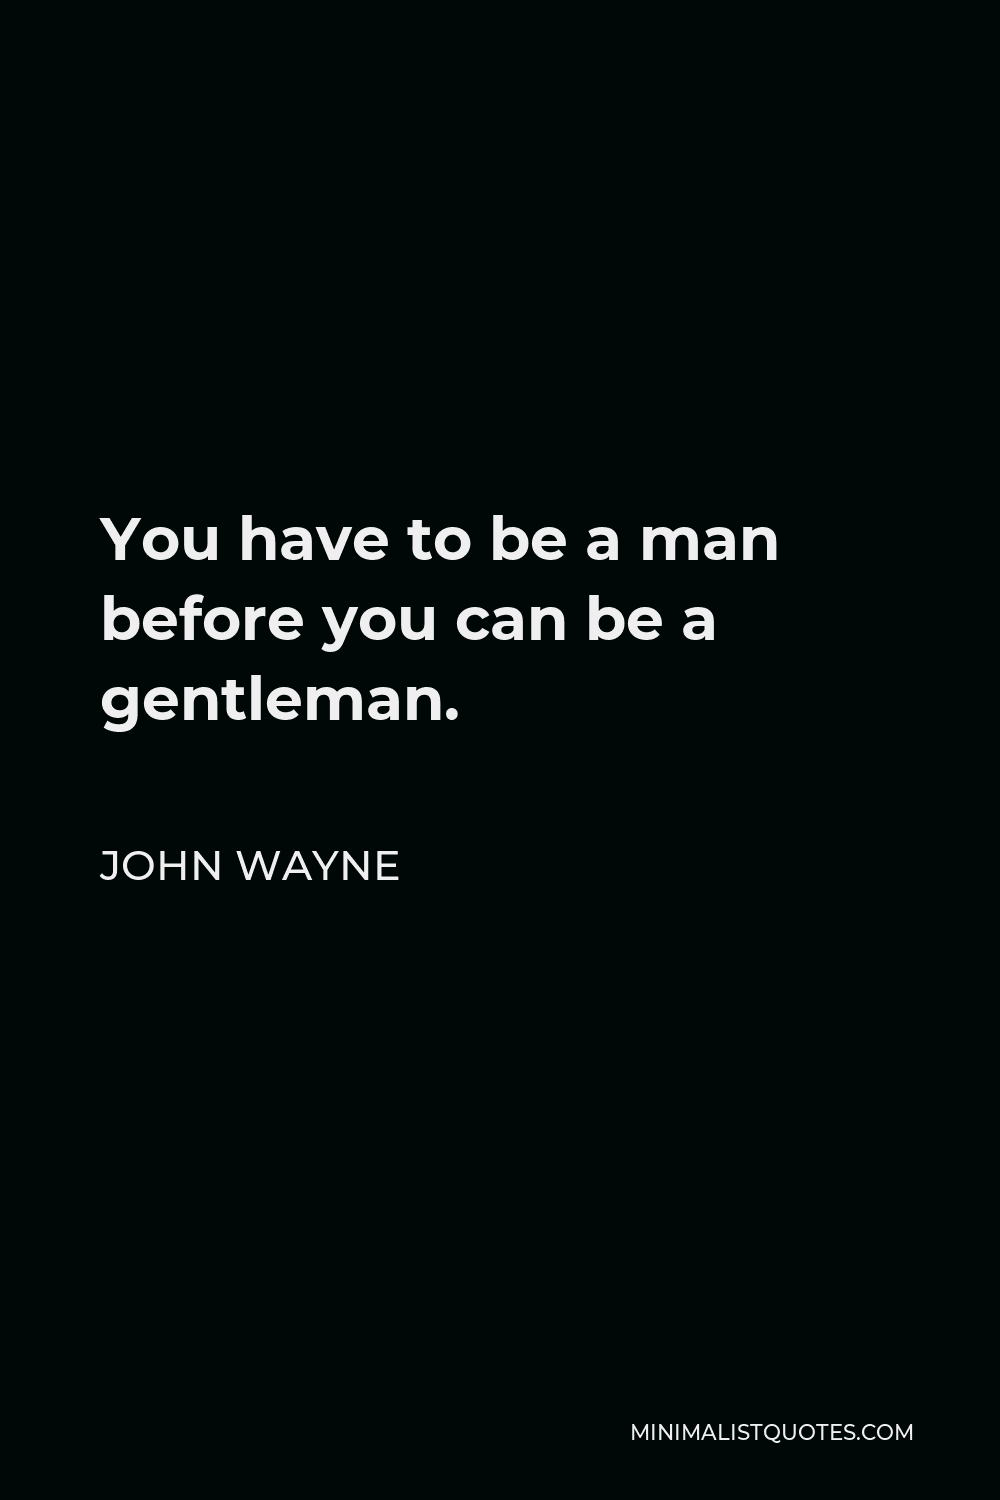 John Wayne Quote - You have to be a man before you can be a gentleman.